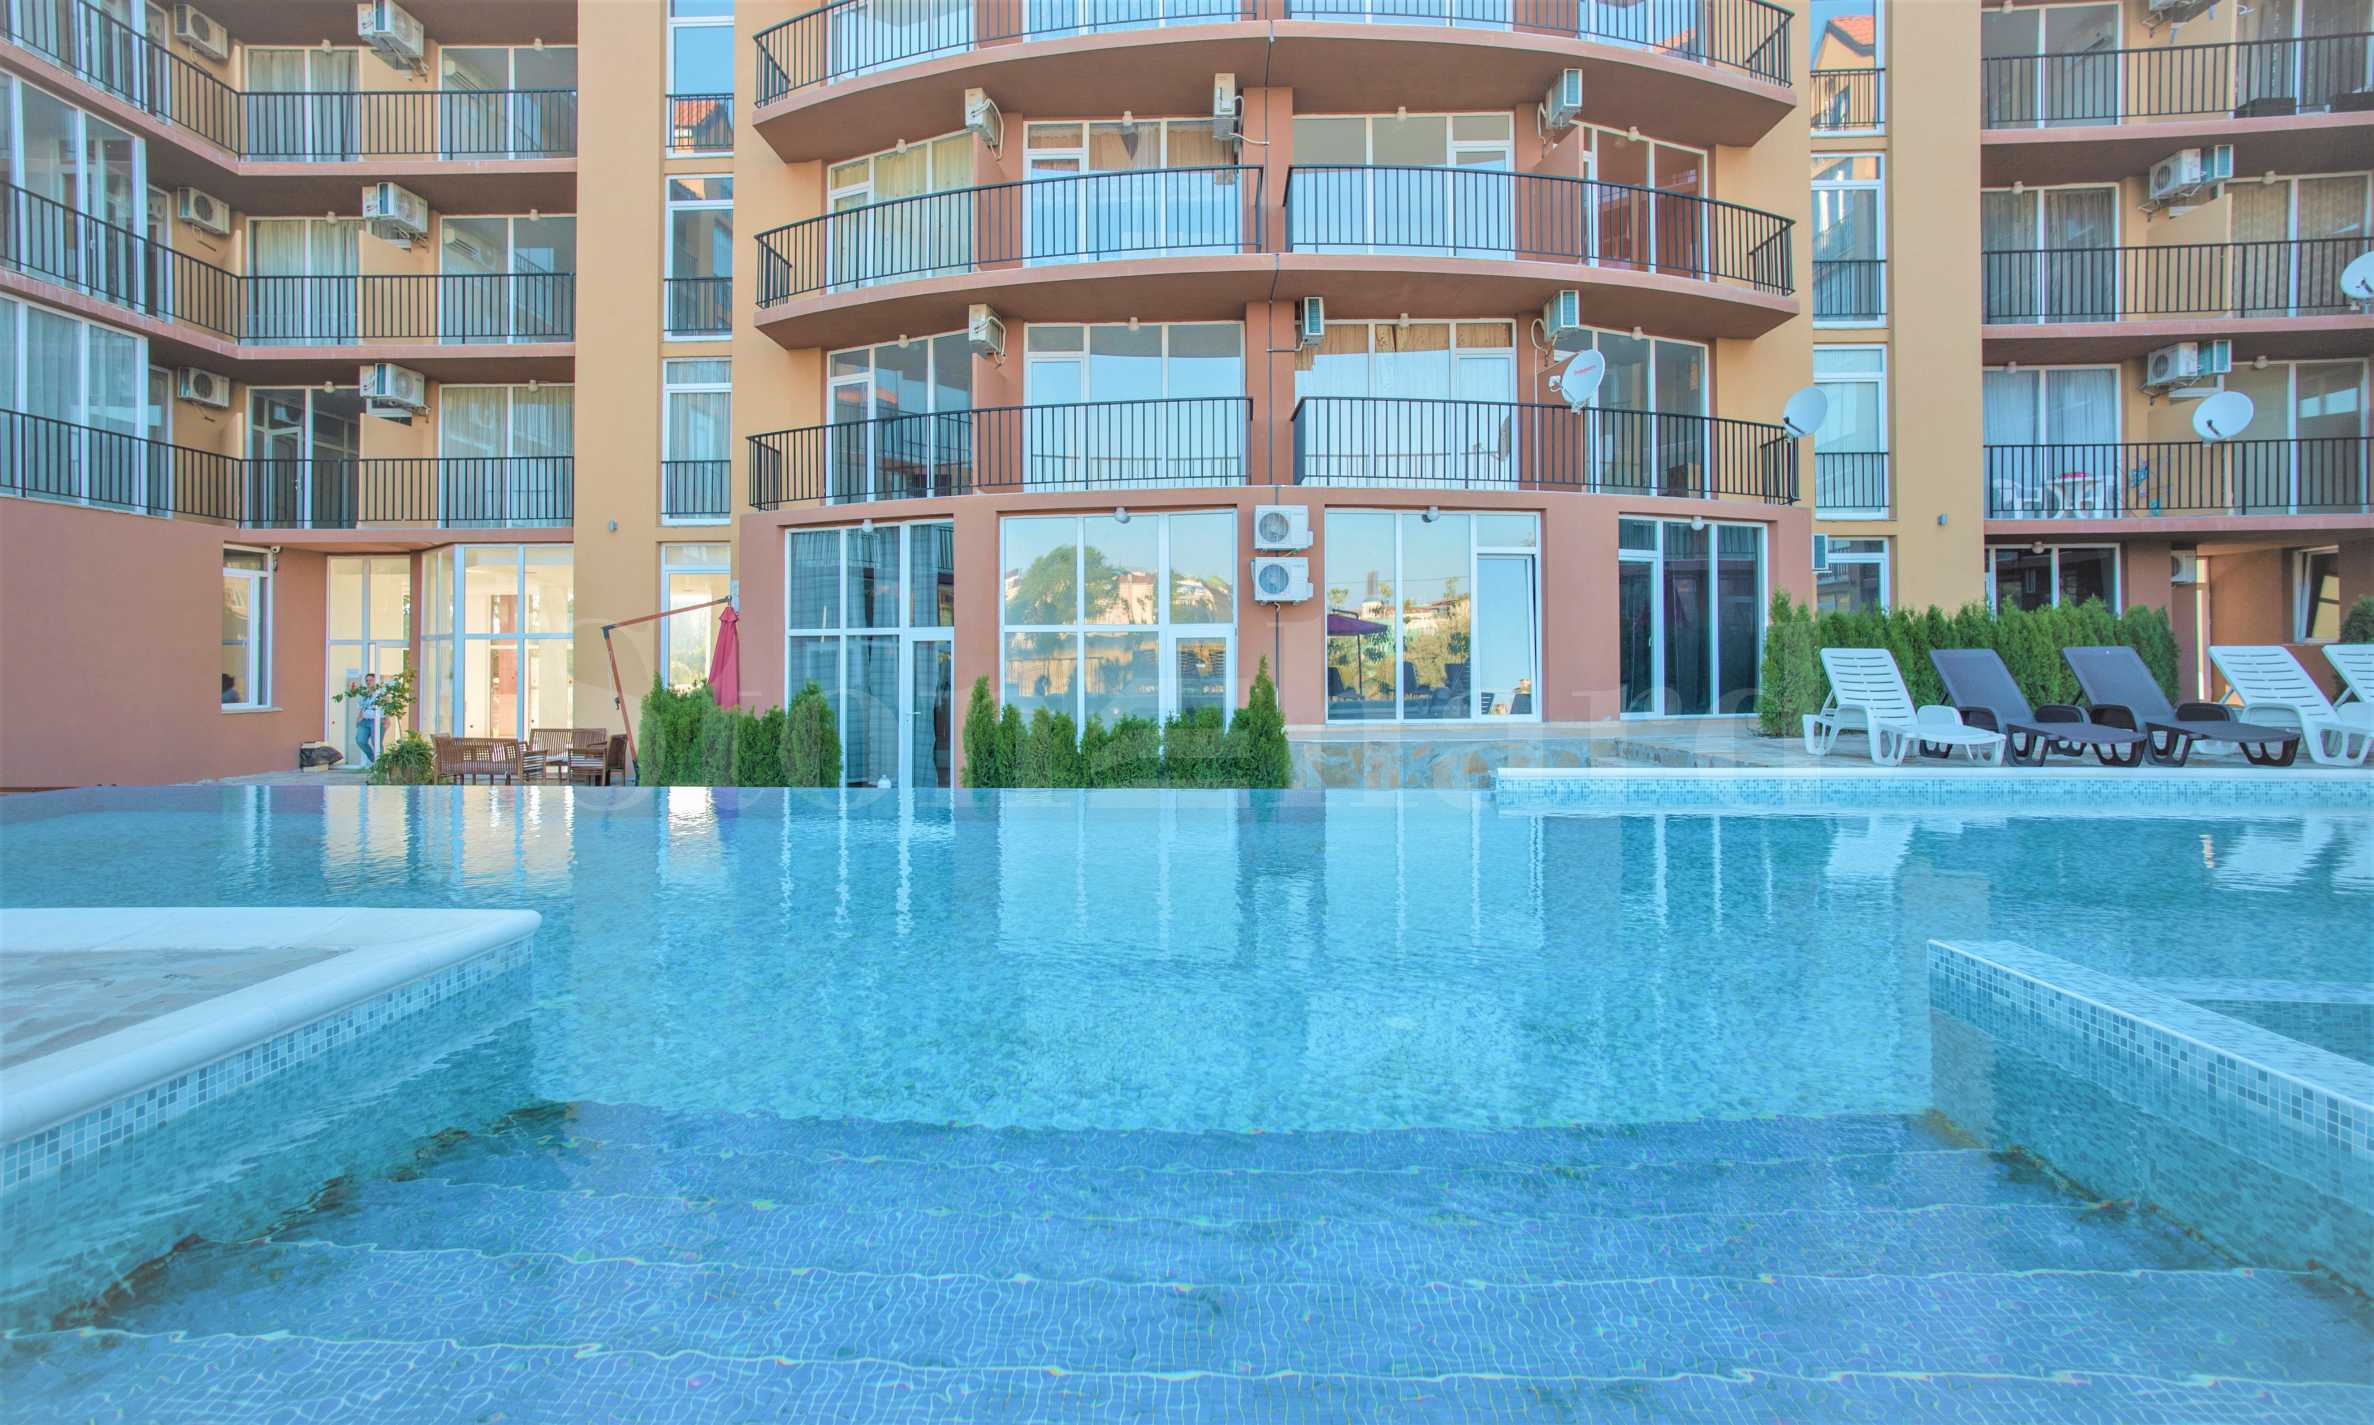 Apartments in a complex with a pool 7 minutes from Cacao Beach2 - Stonehard